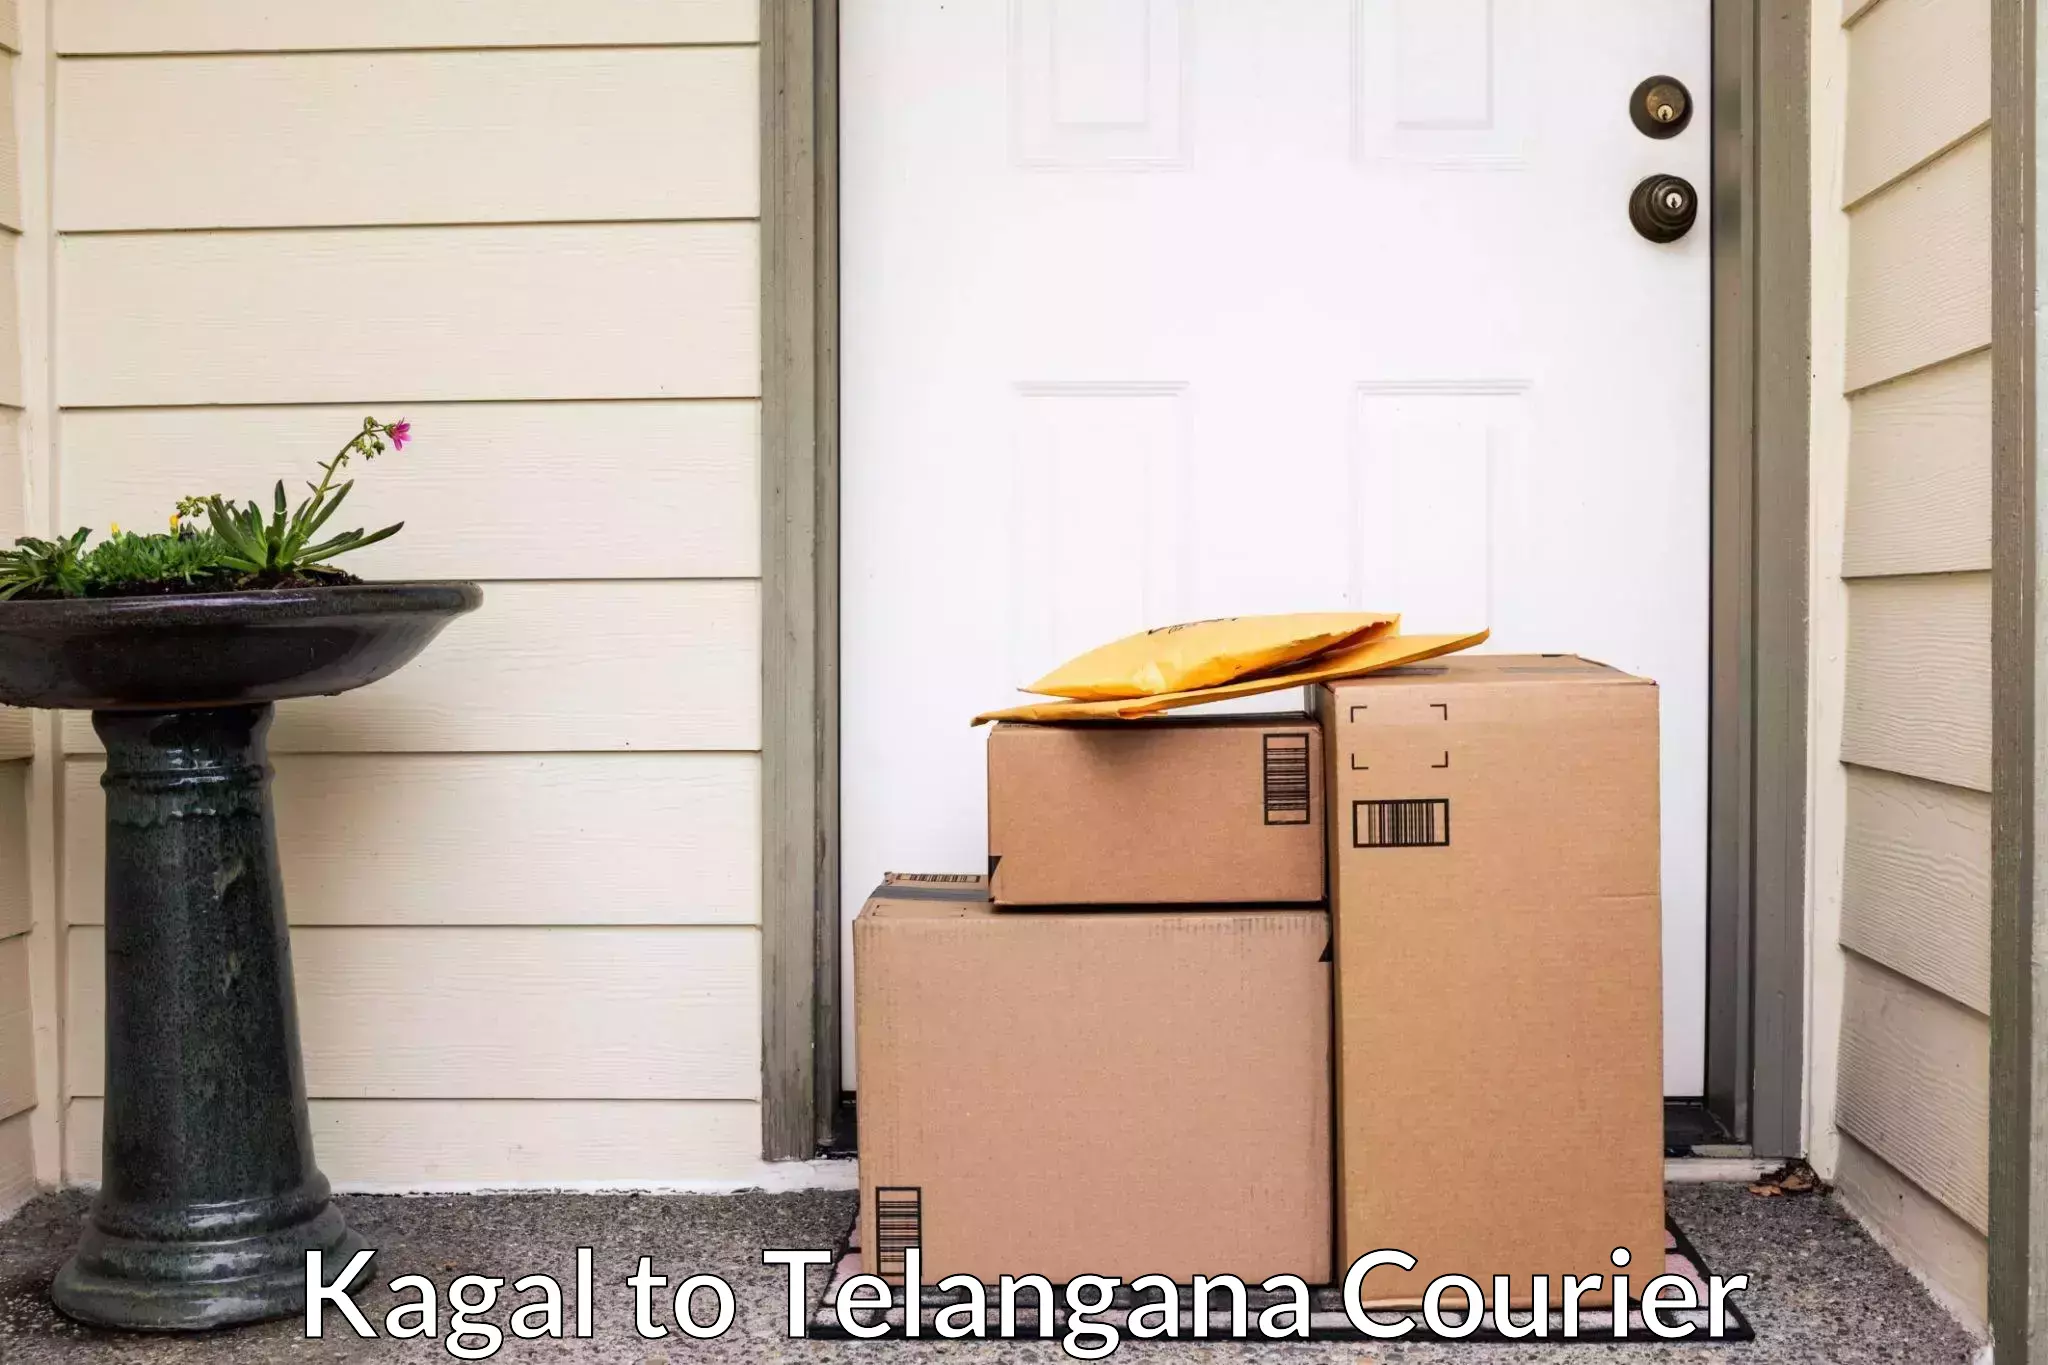 Trusted relocation experts Kagal to Manneguda